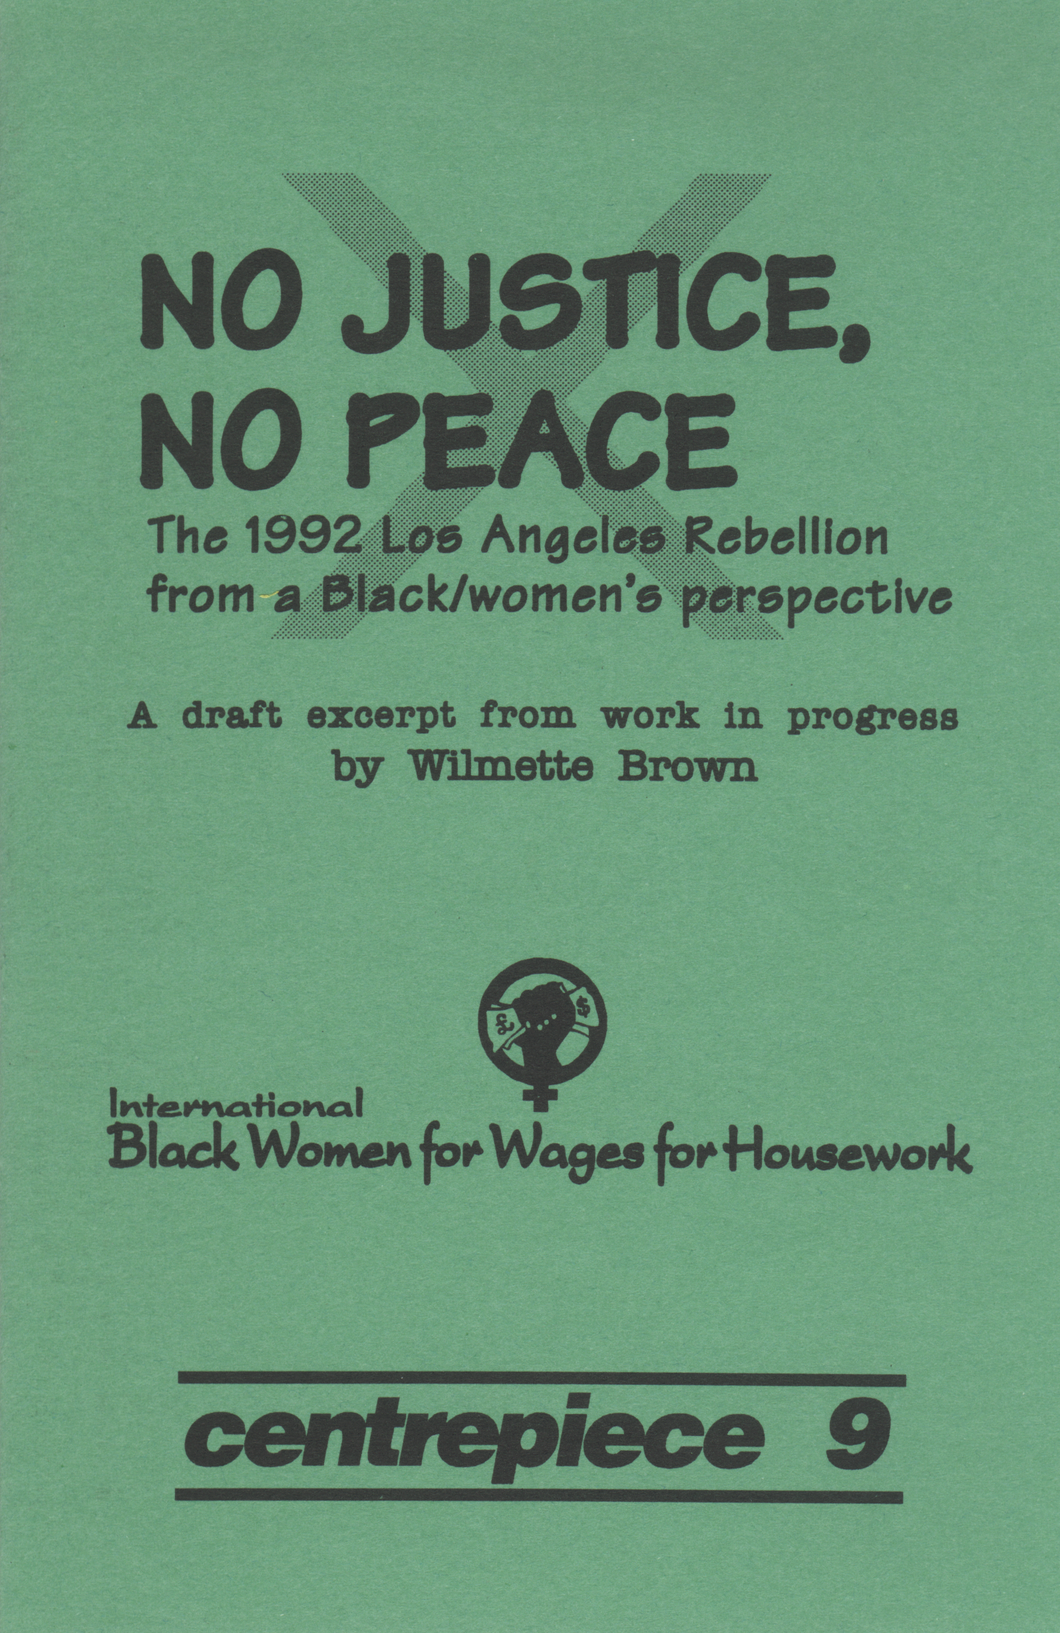 No Justice, No Peace: The 1992 Los Angeles Rebellion from a Black/women’s perspective